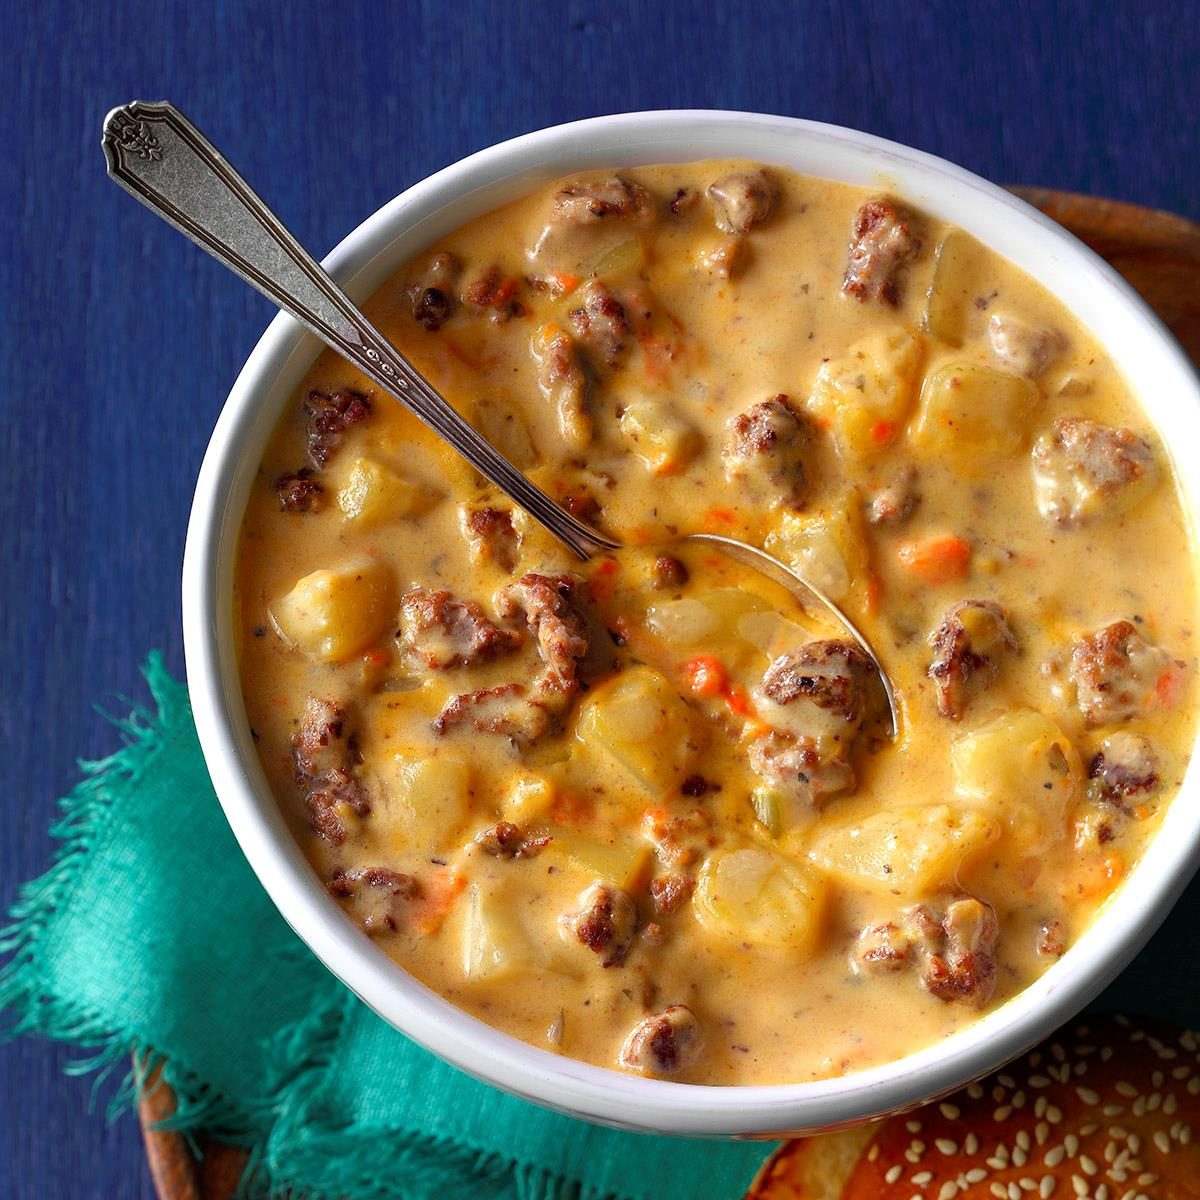 campbell's cheddar cheese soup recipes with ground beef